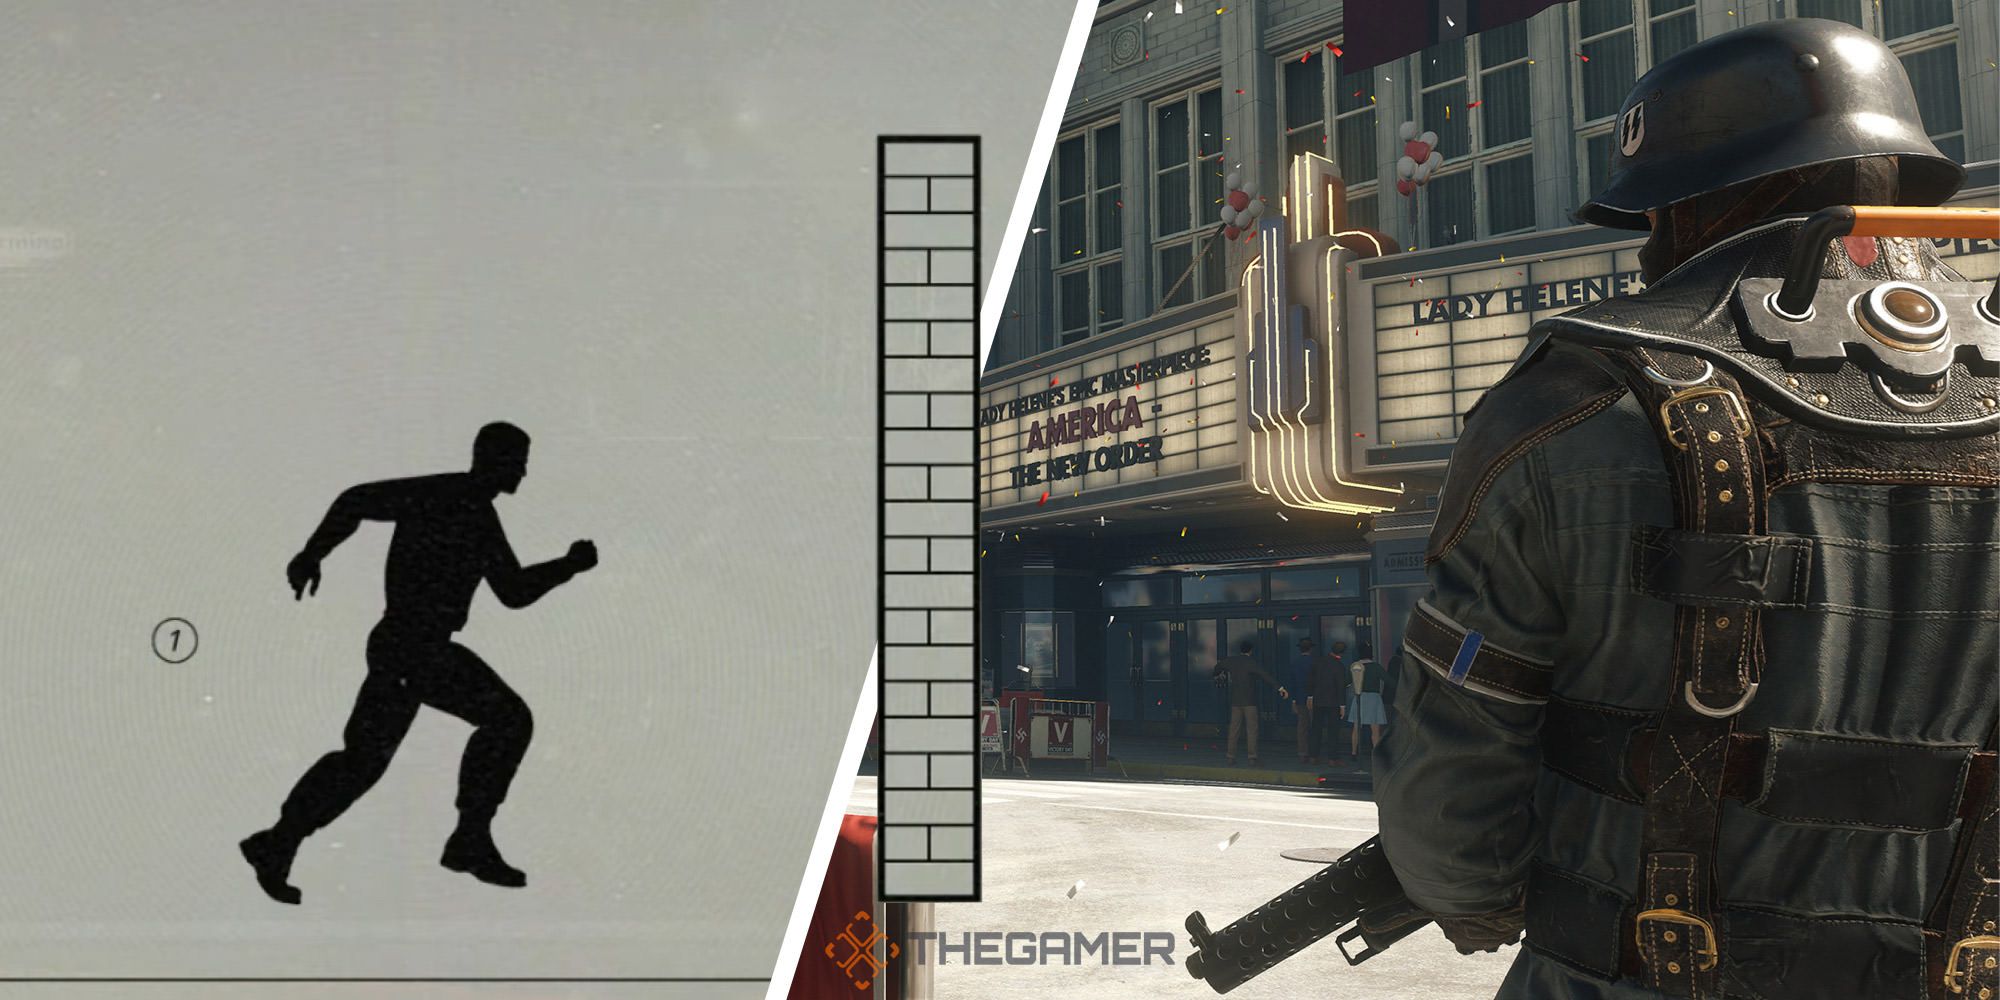 Wolfenstein The New Order - Complete Health And Armor Locations Guide 